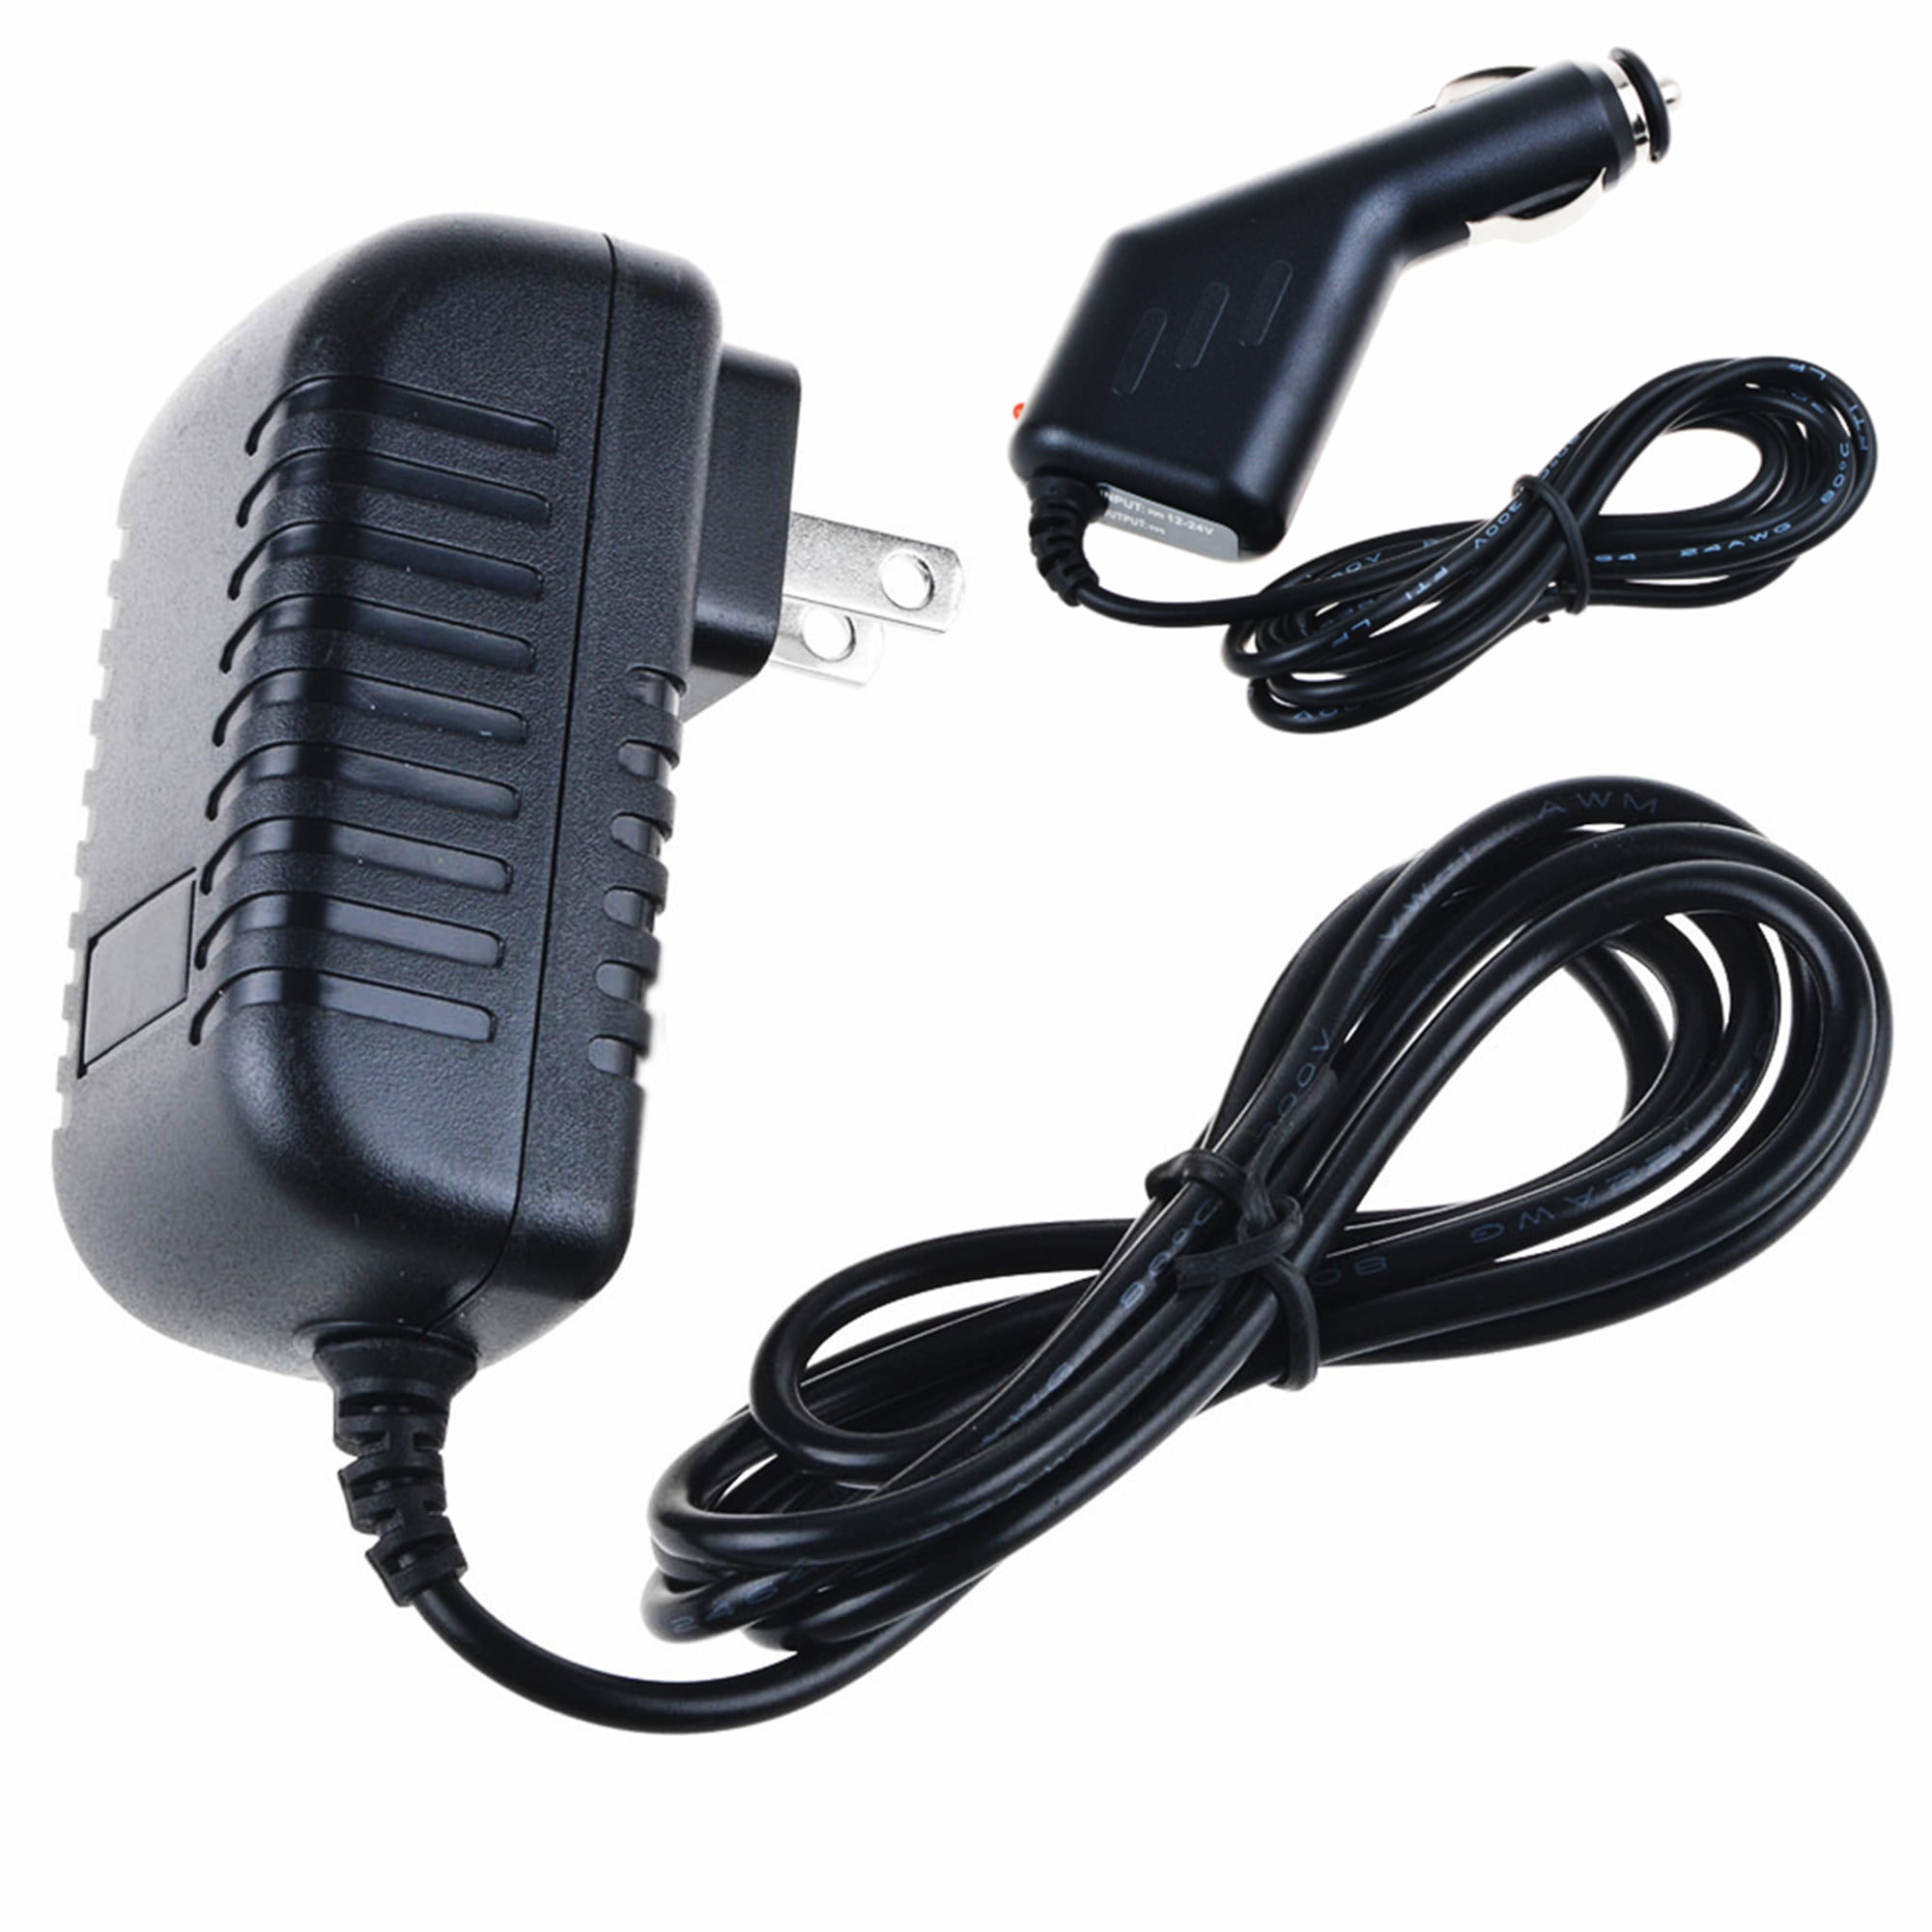 AC Adapter Car DC Charger For LEAPFROG LEAPSTER PINK GREEN EXPLORER DIDJ Auto 